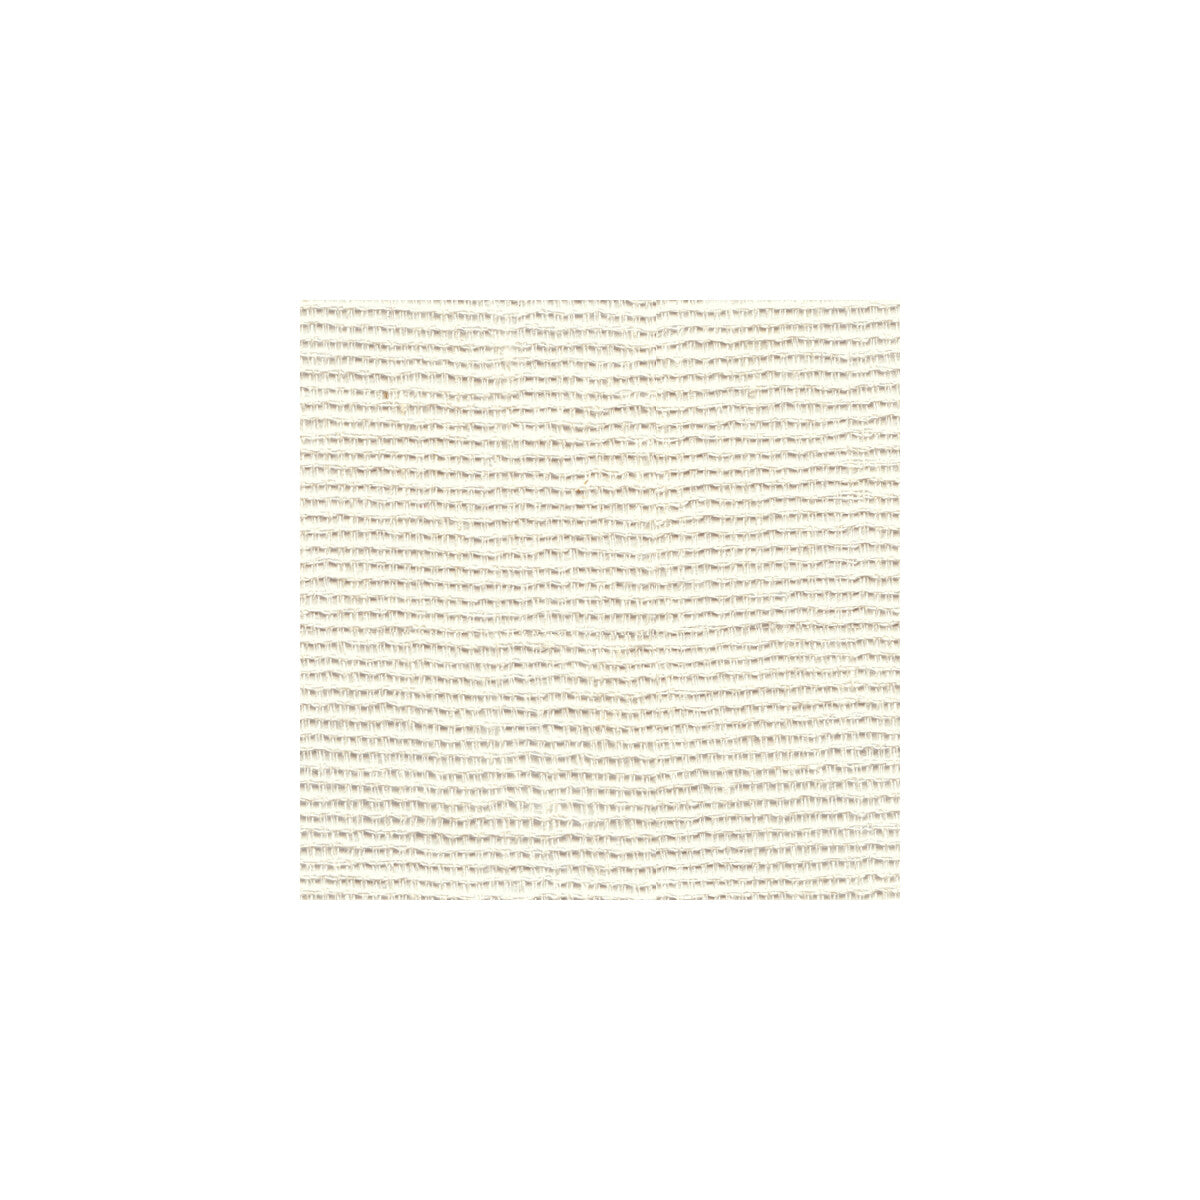 Dawes fabric in natural color - pattern 3797.1.0 - by Kravet Basics in the Thom Filicia collection